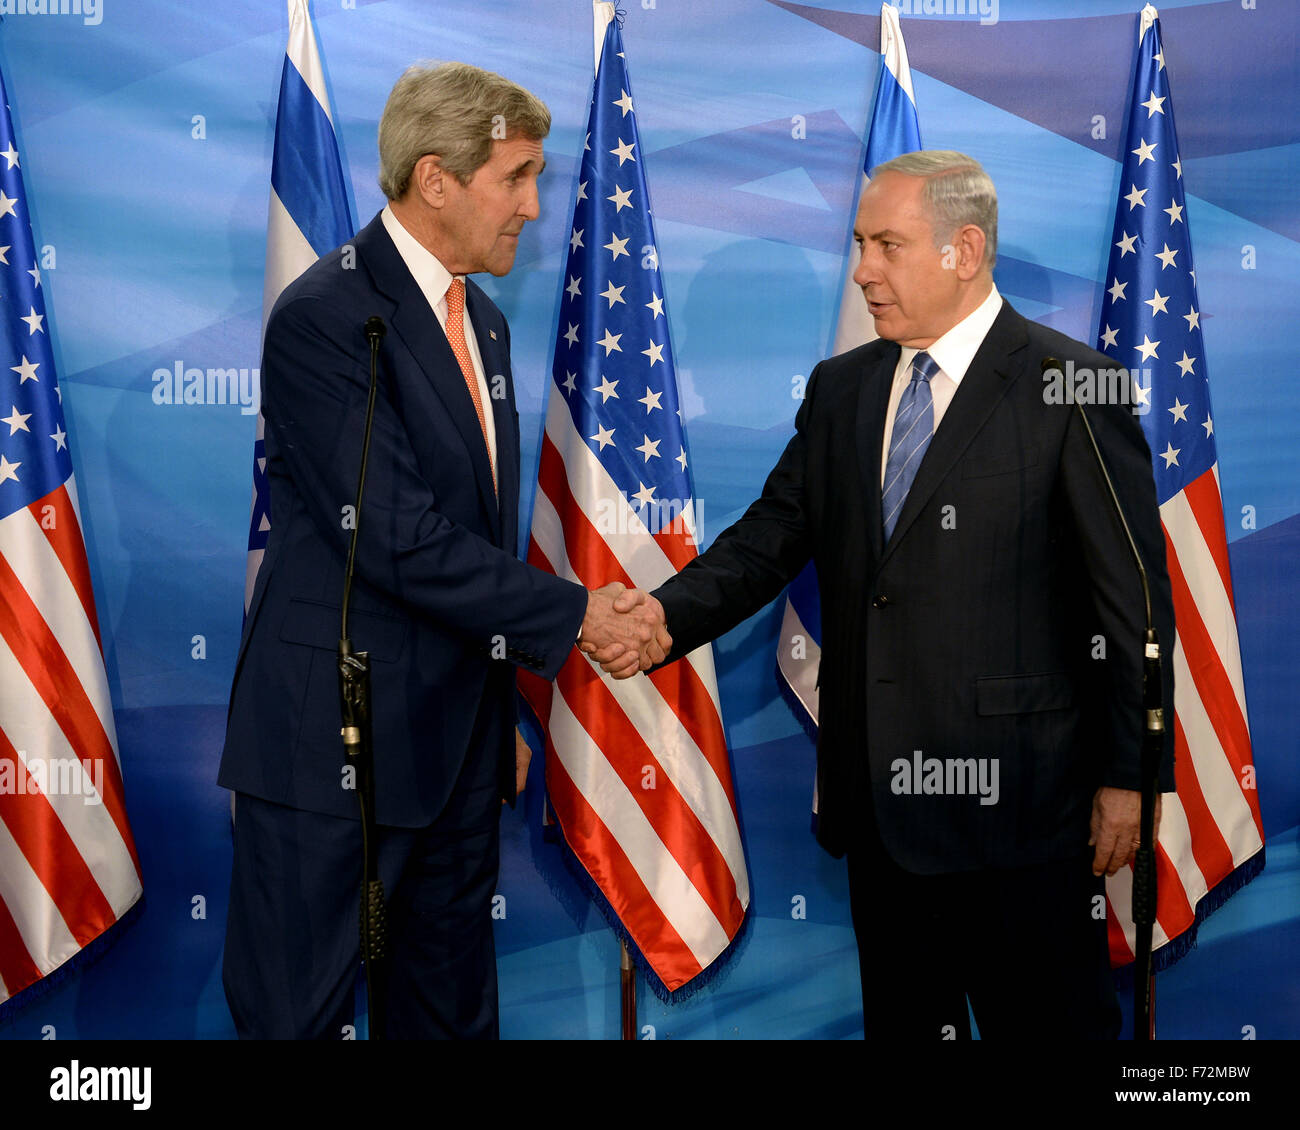 Jerusalem. 24th Nov, 2015. Israeli Prime Minister Benjamin Netanyahu (R) shakes hands with visiting U.S. Secretary of State John Kerry in Jerusalem, on Nov. 24, 2015. Kerry arrived here on Tuesday morning to pay a visit to Israel and the West Bank in hopes of curtailing the two-month long wave of violence. Credit:  U.S. Embassy to Israel/Matty Stern/Xinhua/Alamy Live News Stock Photo